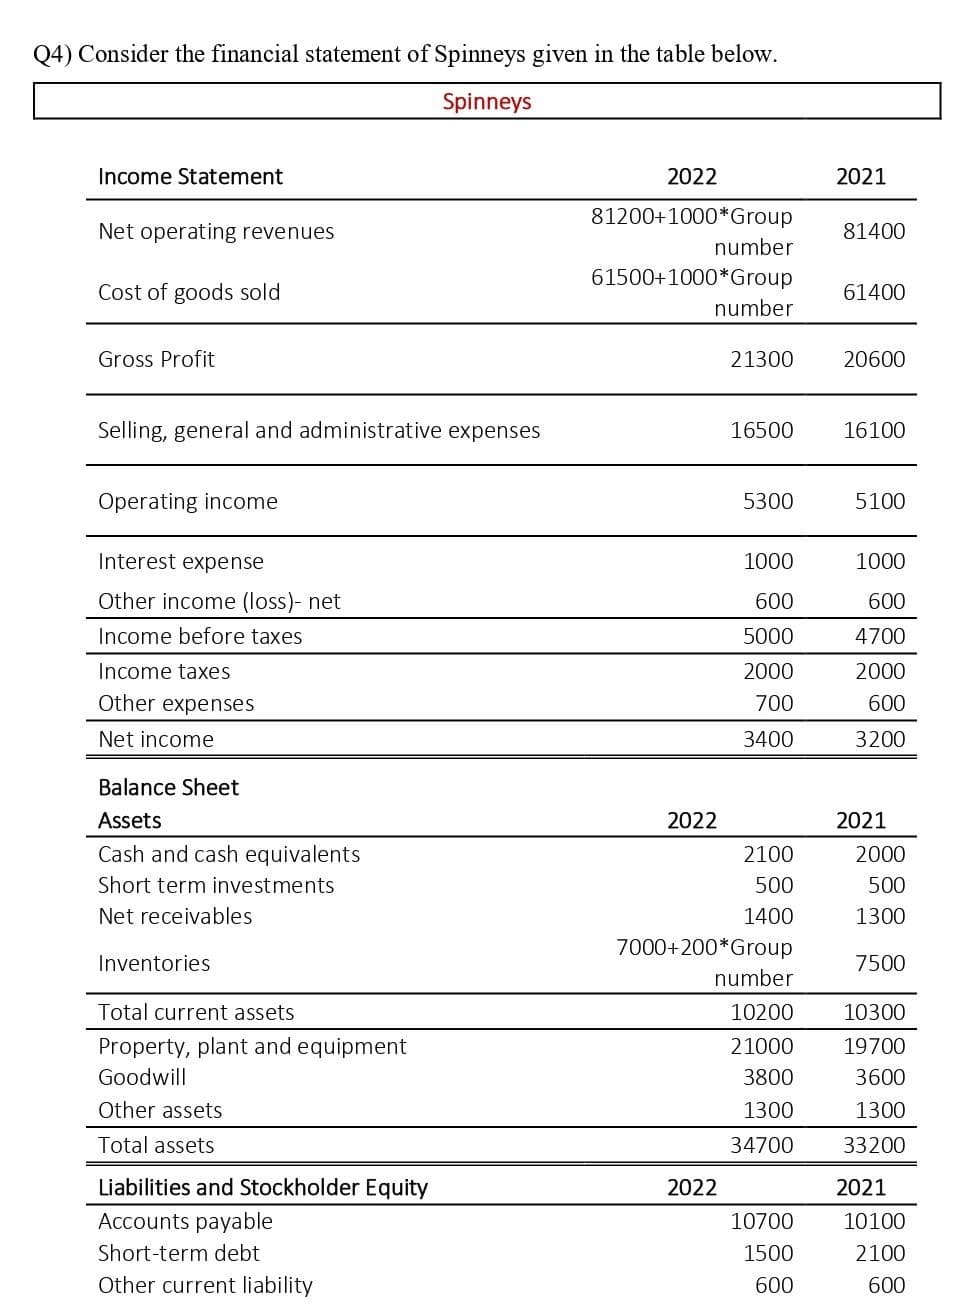 Q4) Consider the financial statement of Spinneys given in the table below.
Spinneys
Income Statement
Net operating revenues
Cost of goods sold
Gross Profit
Selling, general and administrative expenses
Operating income
Interest expense
Other income (loss)- net
Income before taxes
Income taxes
Other expenses
Net income
Balance Sheet
Assets
Cash and cash equivalents
Short term investments
Net receivables
Inventories
Total current assets
Property, plant and equipment
Goodwill
Other assets
Total assets
Liabilities and Stockholder Equity
Accounts payable
Short-term debt
Other current liability
2022
81200+1000*Group
number
61500+1000*Group
number
2022
21300
16500
2022
5300
1000
600
5000
2000
700
3400
2100
500
1400
7000+200*Group
number
10200
21000
3800
1300
34700
10700
1500
600
2021
81400
61400
20600
16100
5100
1000
600
4700
2000
600
3200
2021
2000
500
1300
7500
10300
19700
3600
1300
33200
2021
10100
2100
600